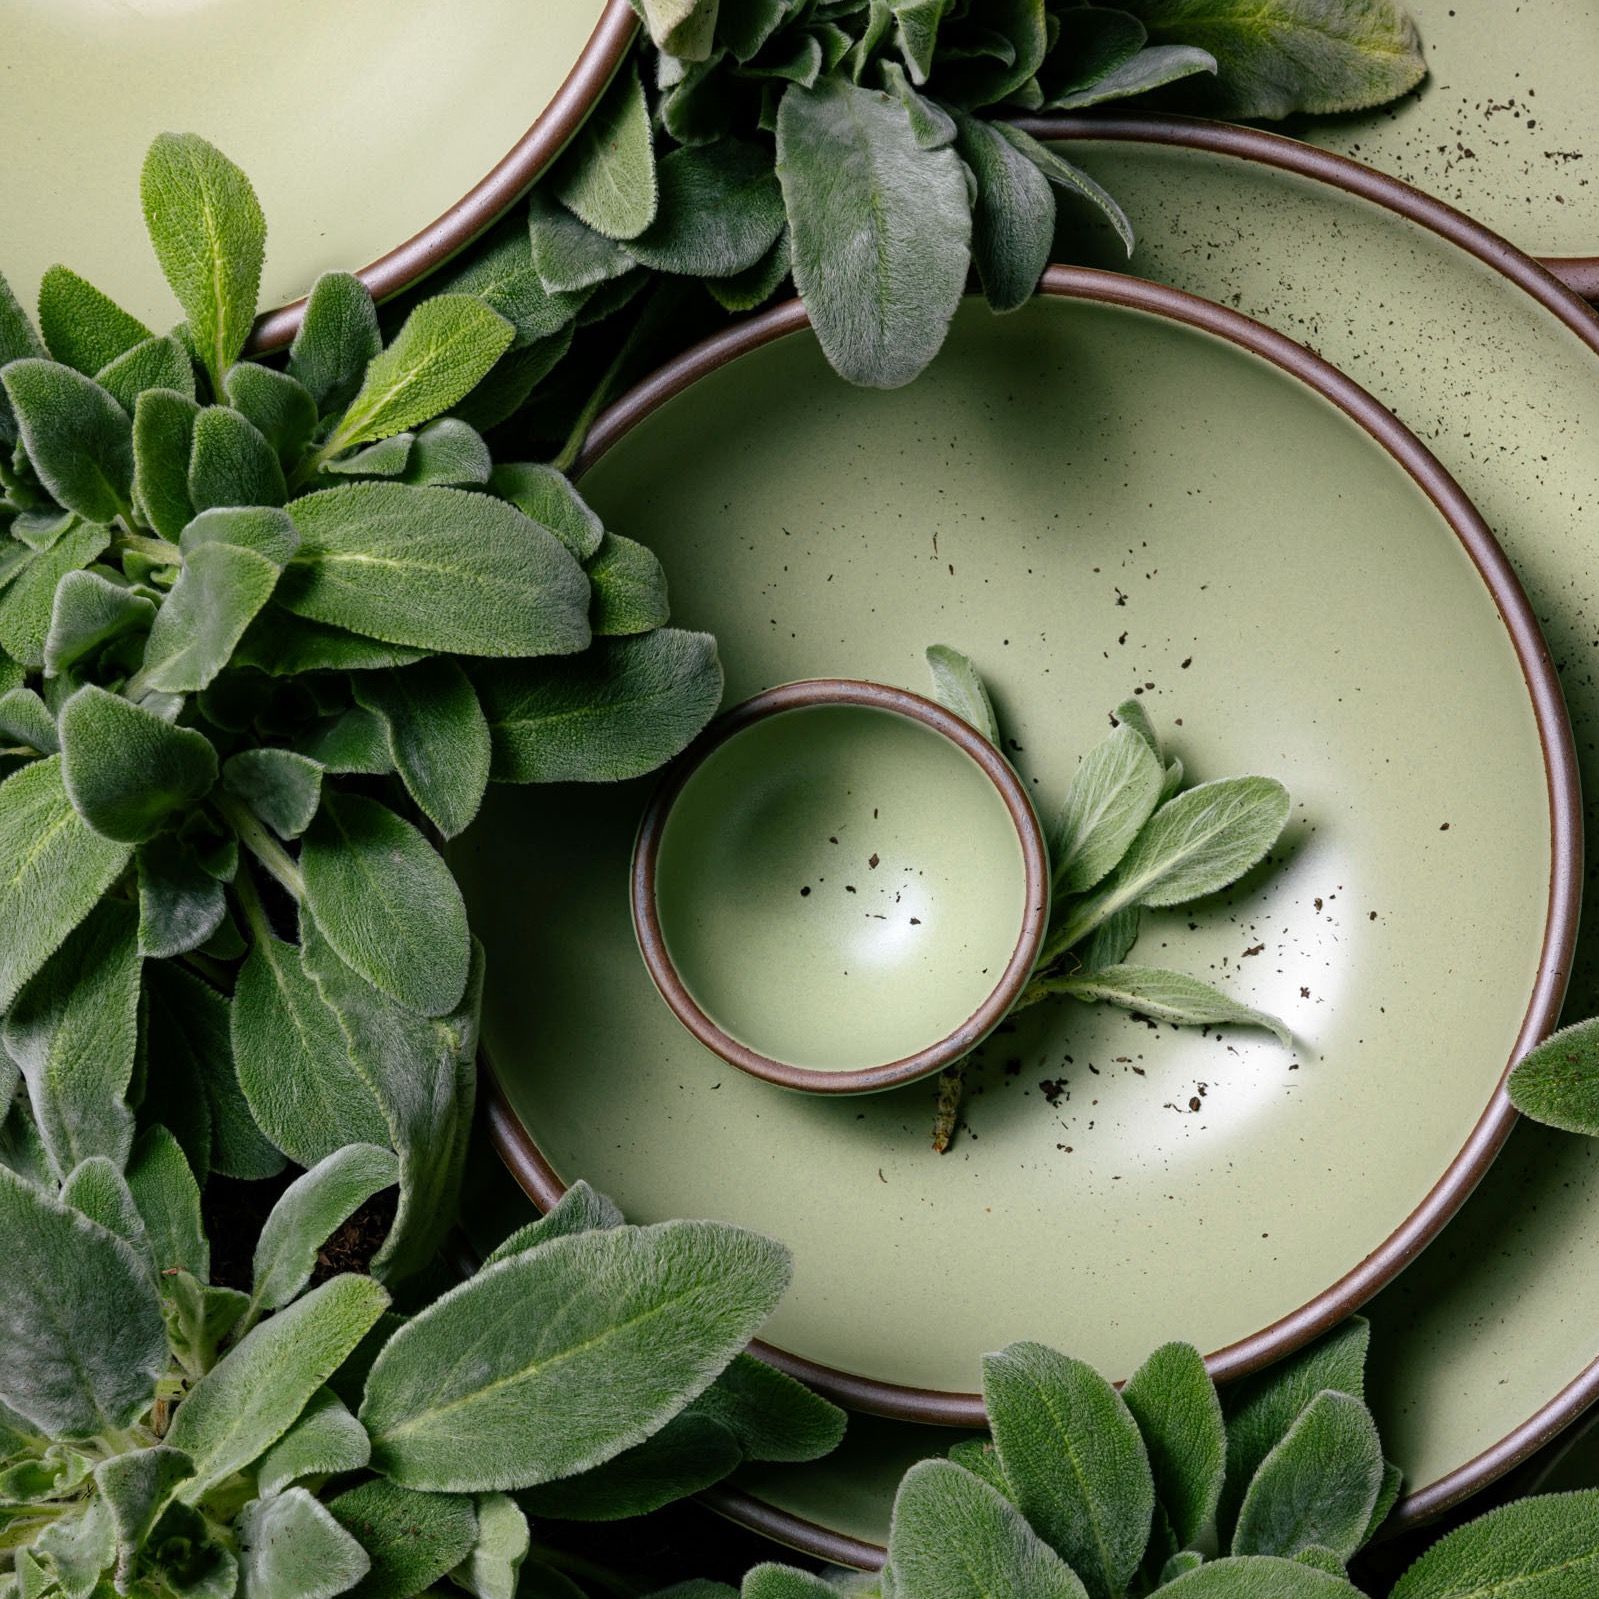 A stack of plates and bowls in various sizes in a calming sage green surrounded by lamb's ear greenery.